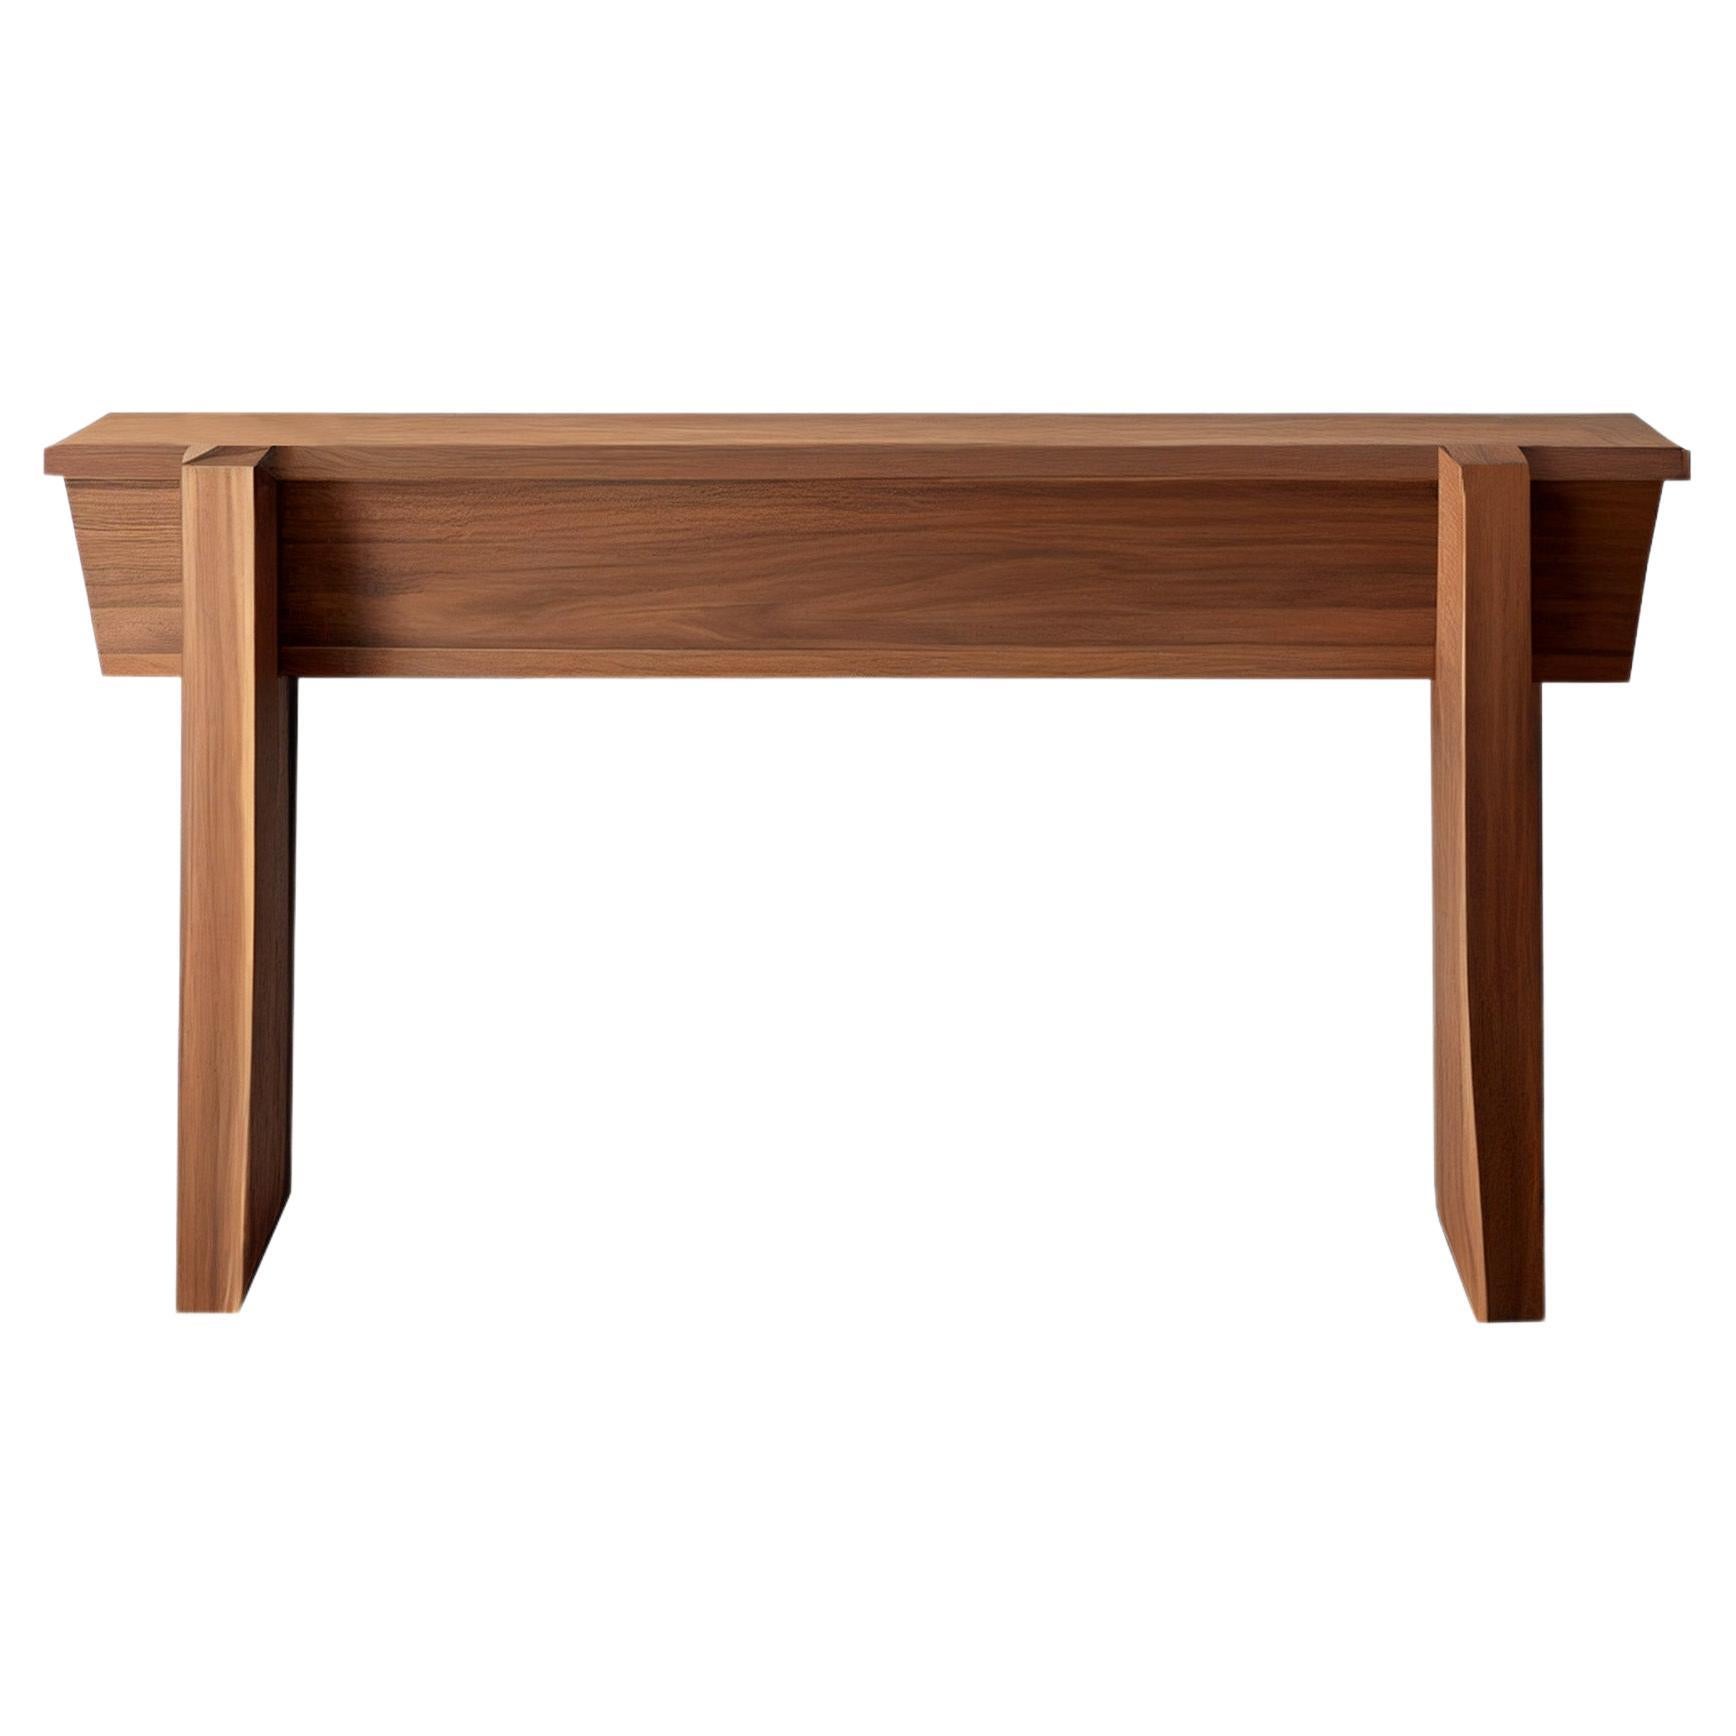 Minimal Console Table, Sideboard Made of Solid Walnut Wood, Narrow Console